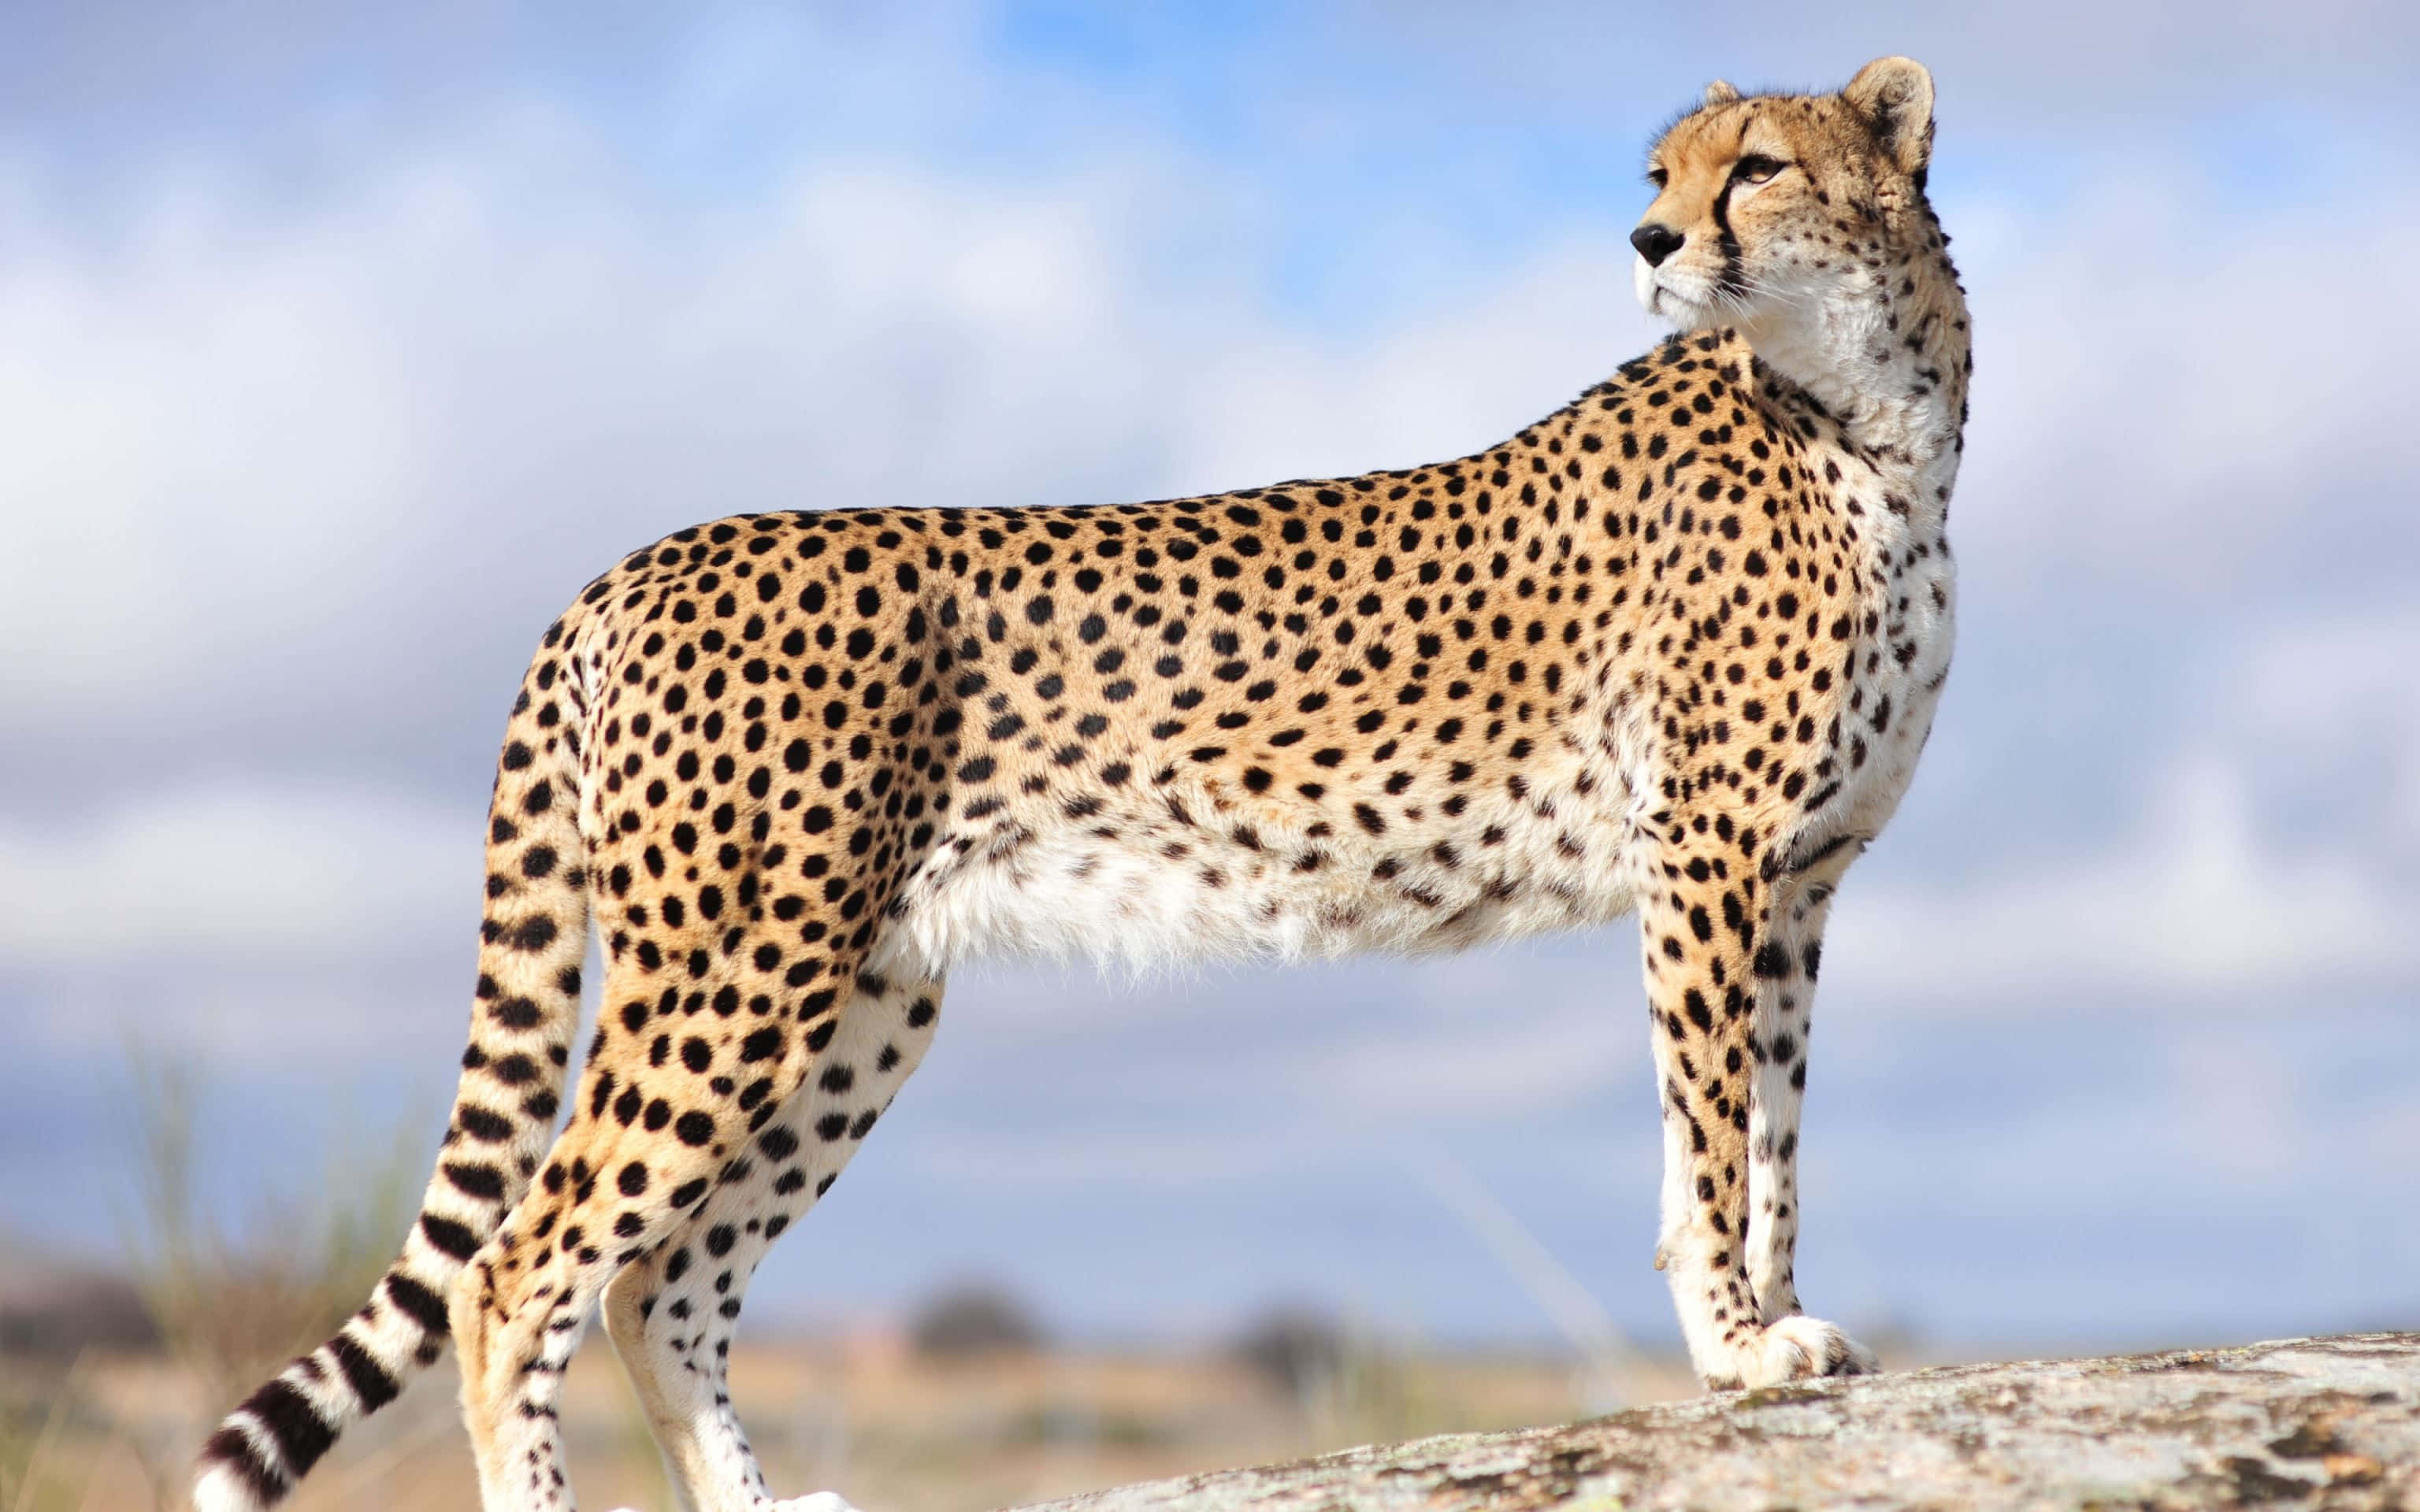 A cheetah displays its grace and beauty in its natural habitat